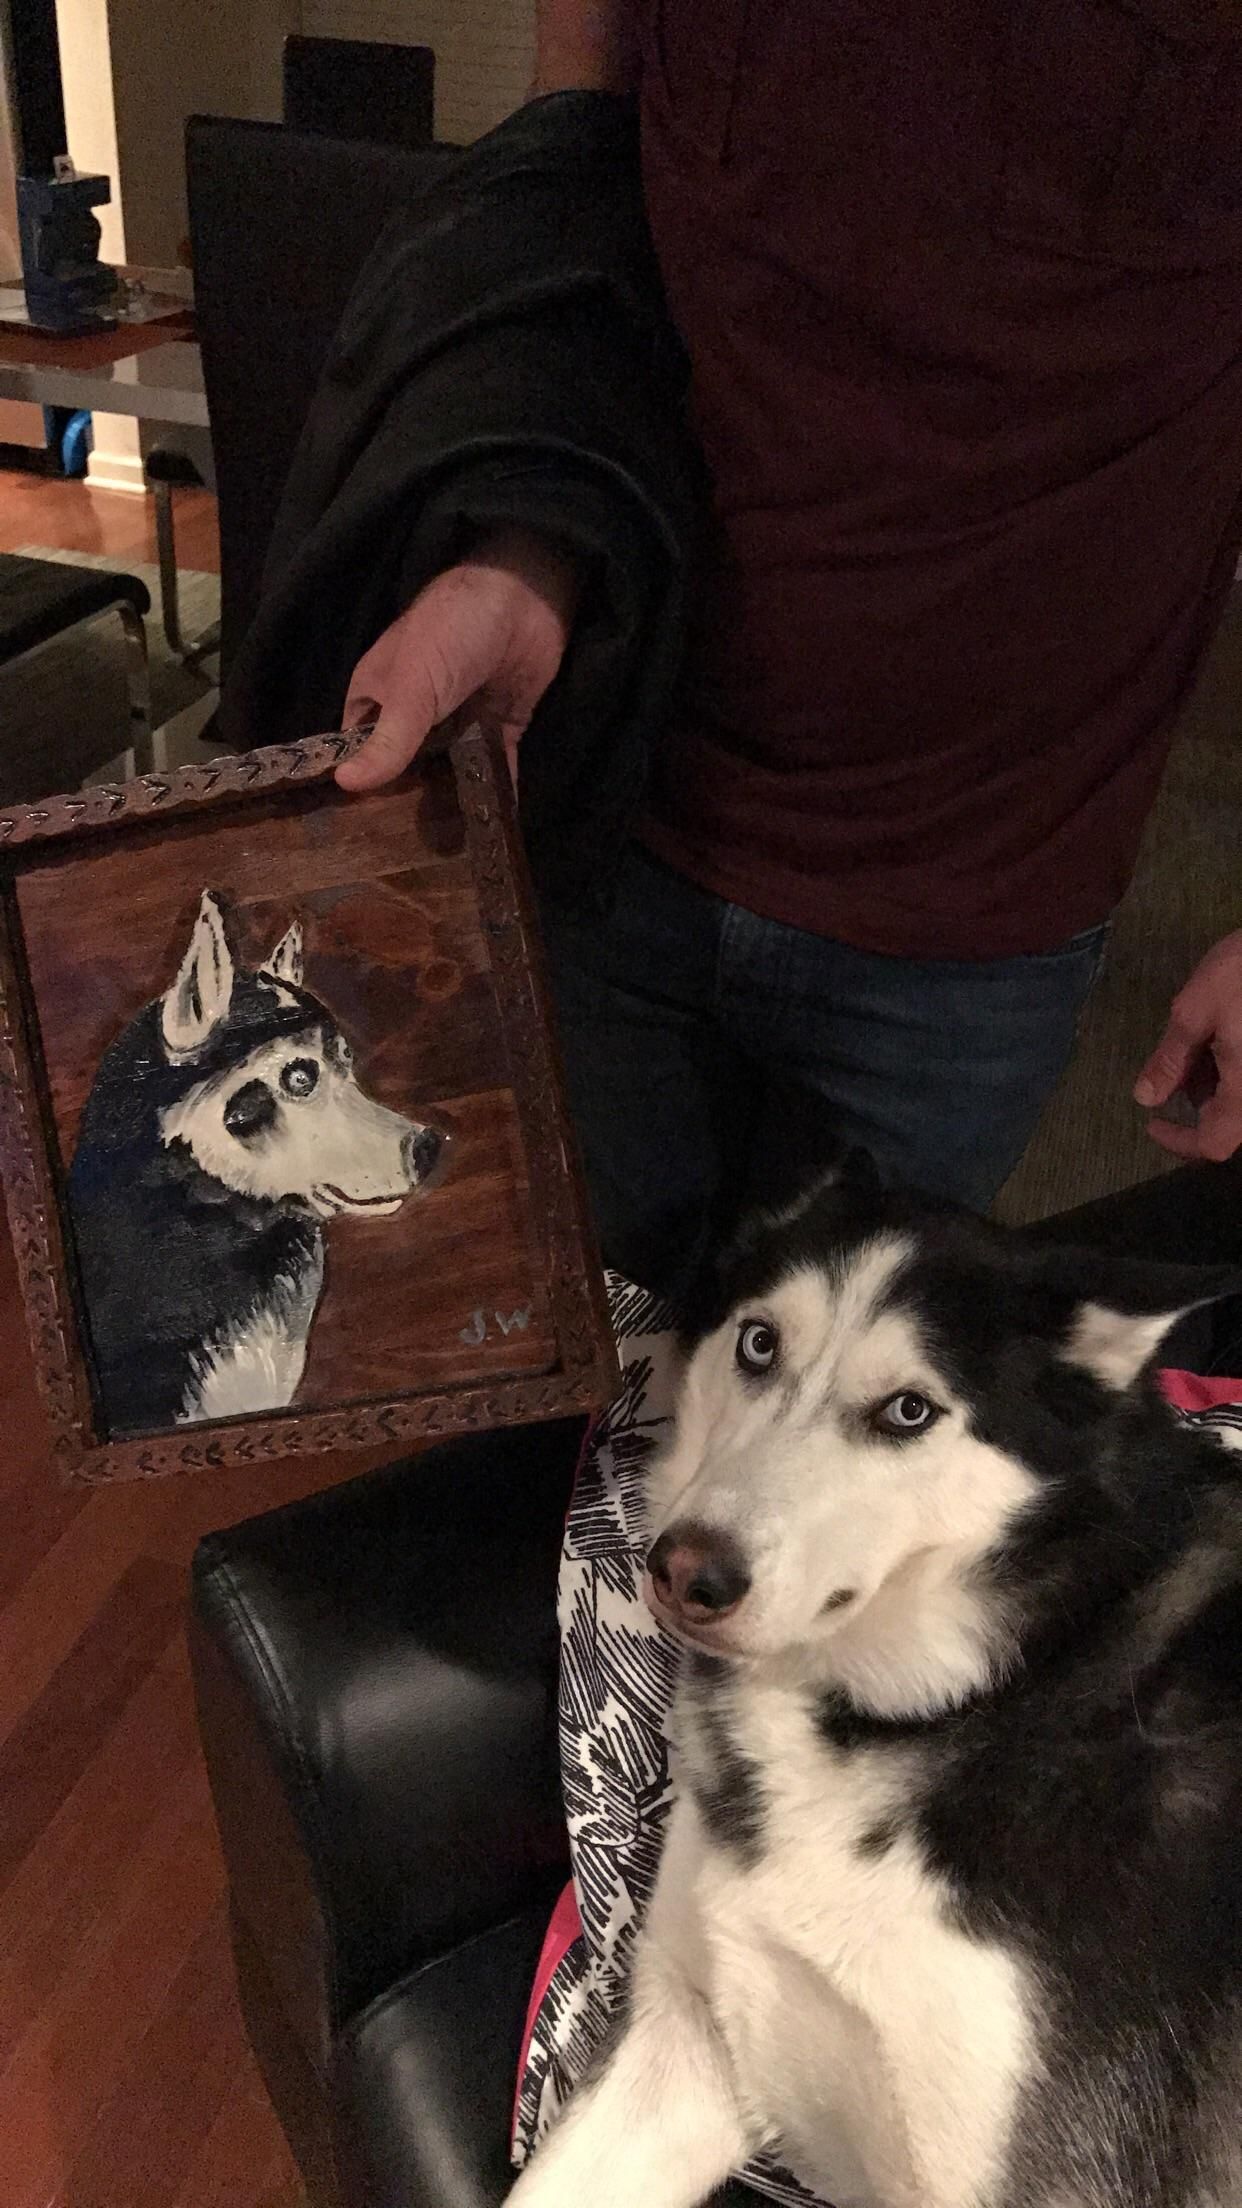 My boyfriend's grandpa carved a derpy picture of our husky. He didn't find it as amusing as we did.